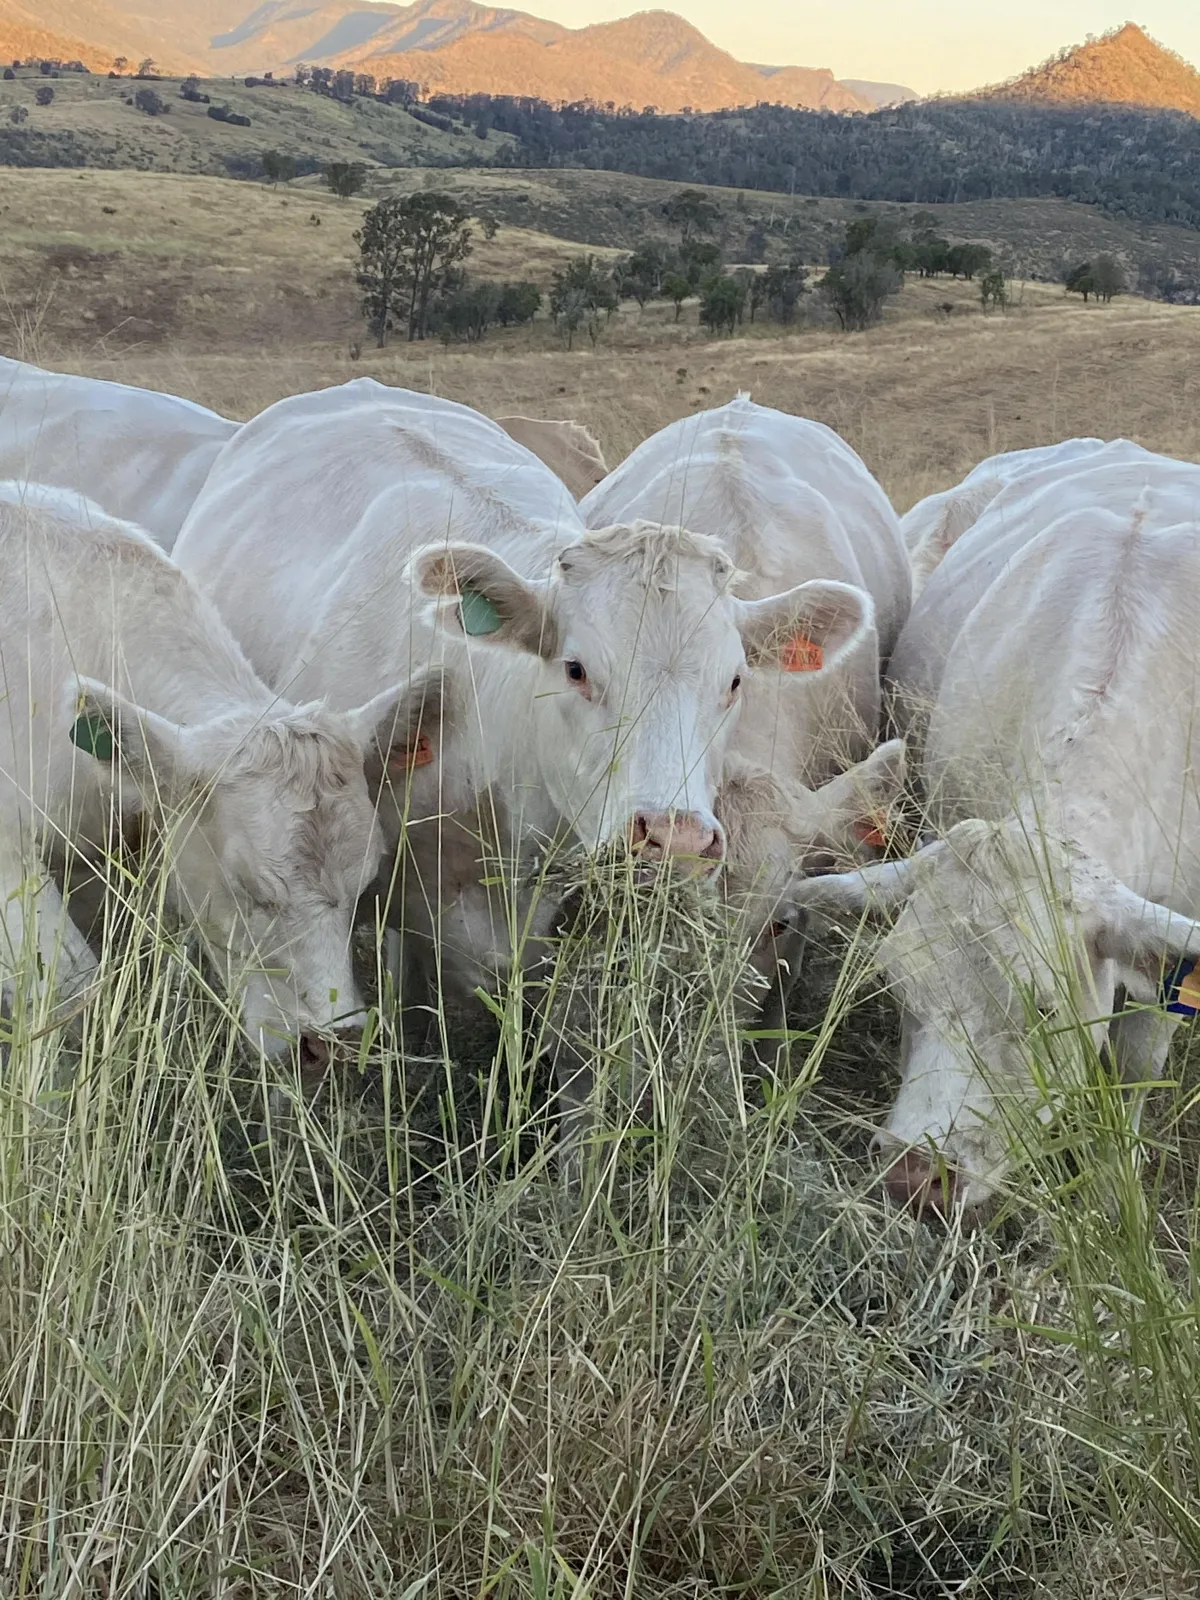 A herd of Charolais cattle grazing in tall grass with a backdrop of rolling hills at dusk, reflecting the robust and productive traits of Black Duck Charolais's breeding program in the Lockyer Valley, South East Queensland.